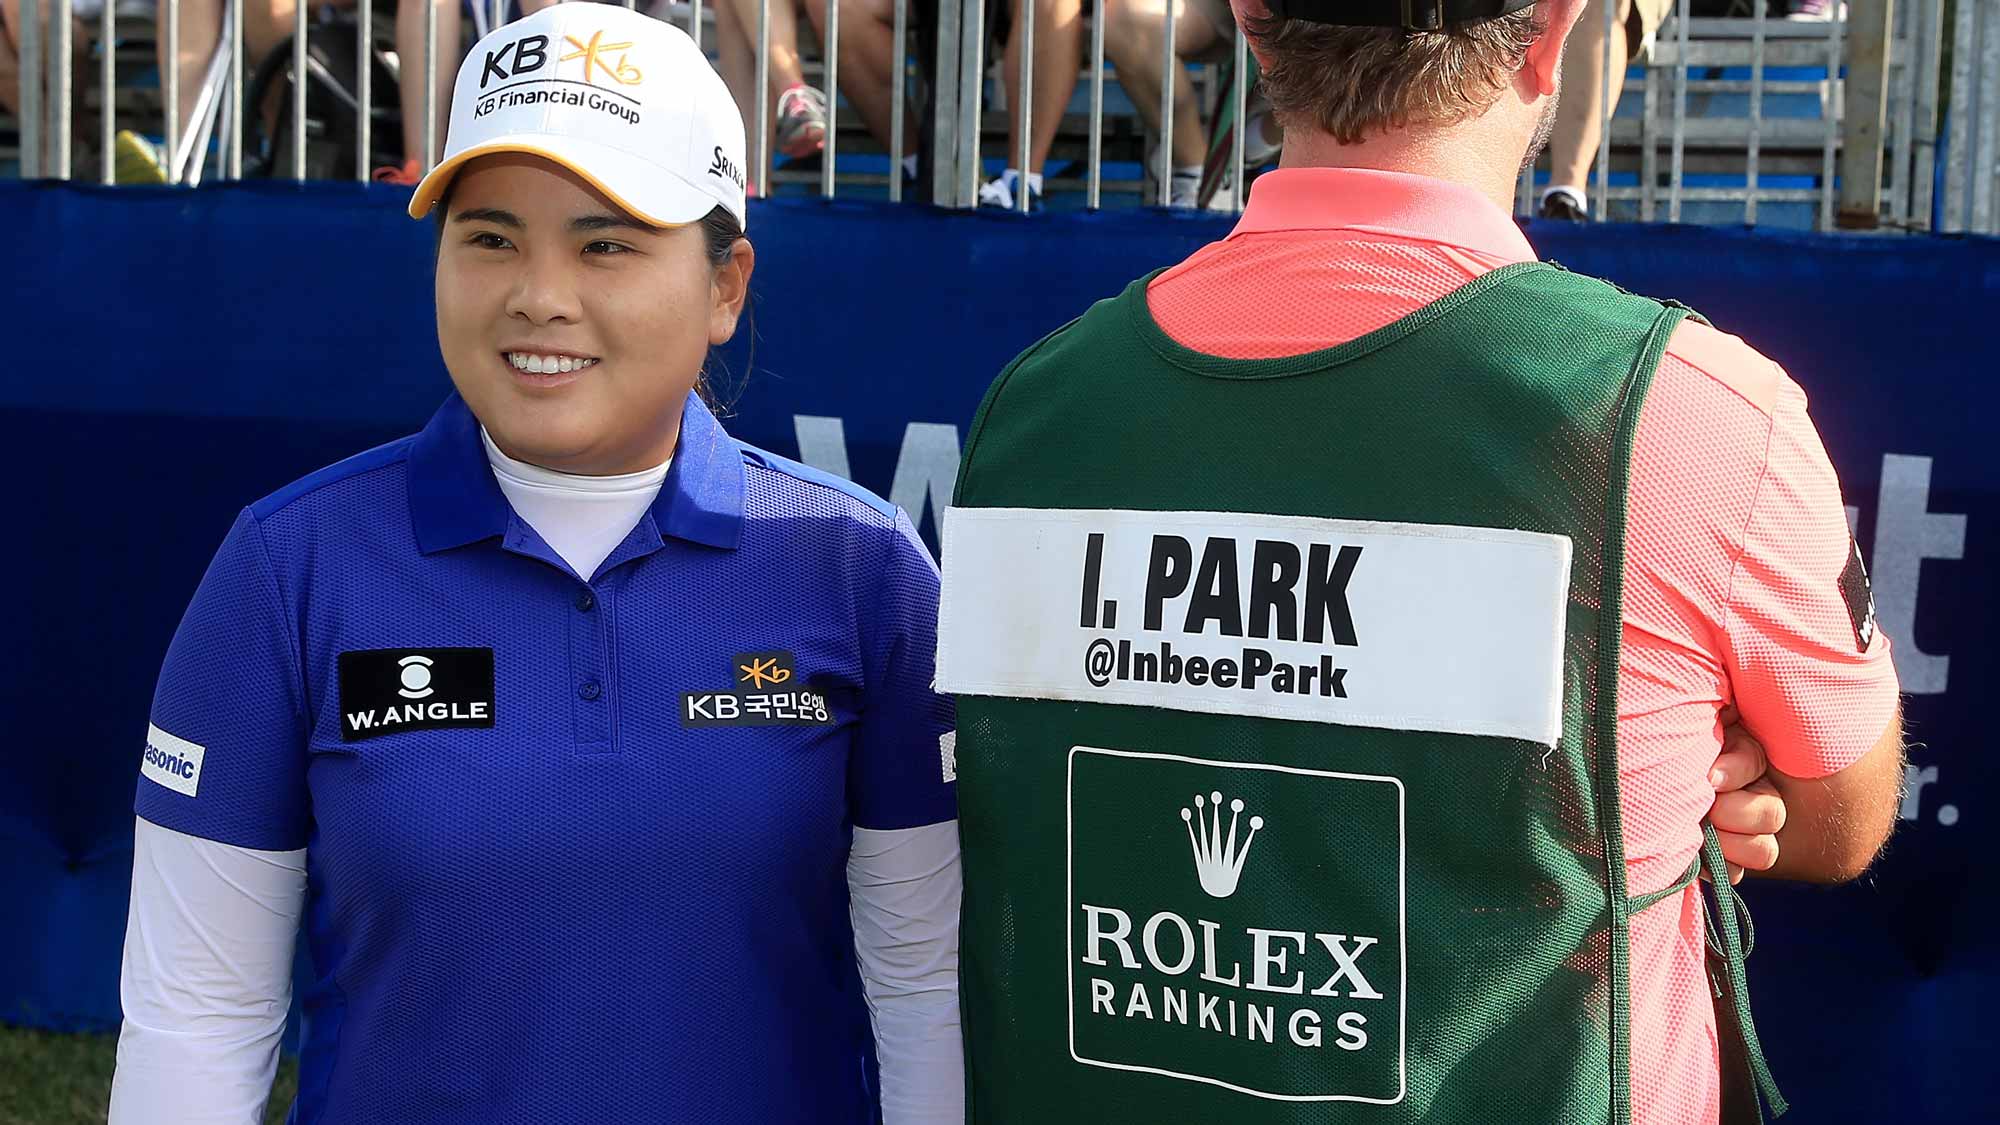 Inbee Park of South Korea poses with her caddie Brad Beecher. Park moved to first place in the Rolex Rankings prior to the first round of the Walmart NW Arkansas Championship Presented by P&G at Pinnacle Country Clu